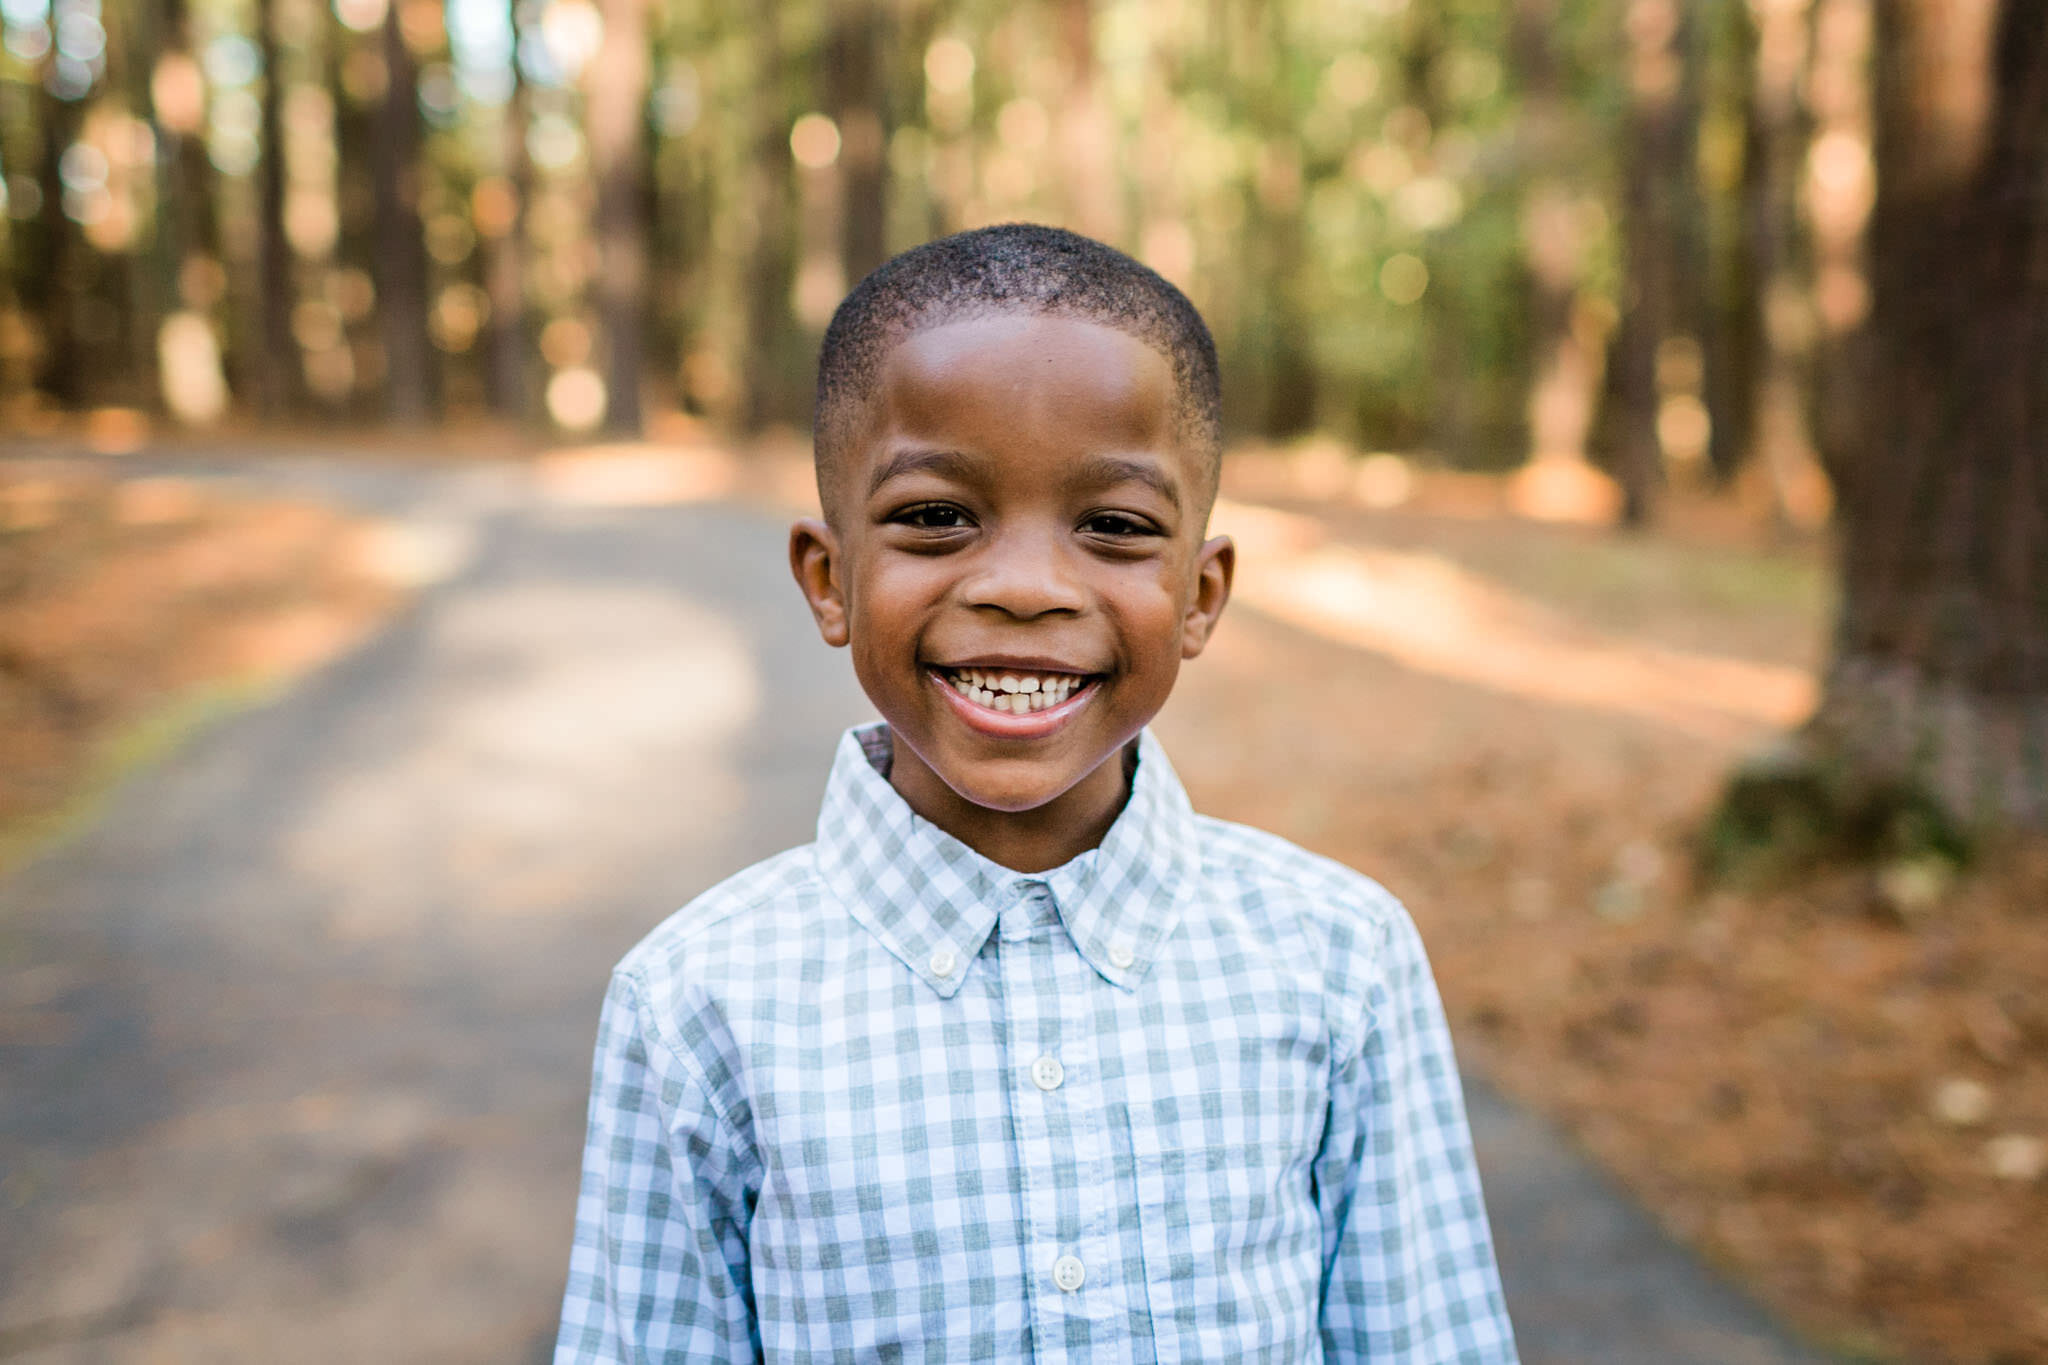 Raleigh Family Photographer | By G. Lin Photography | Umstead Park | Young boy smiling